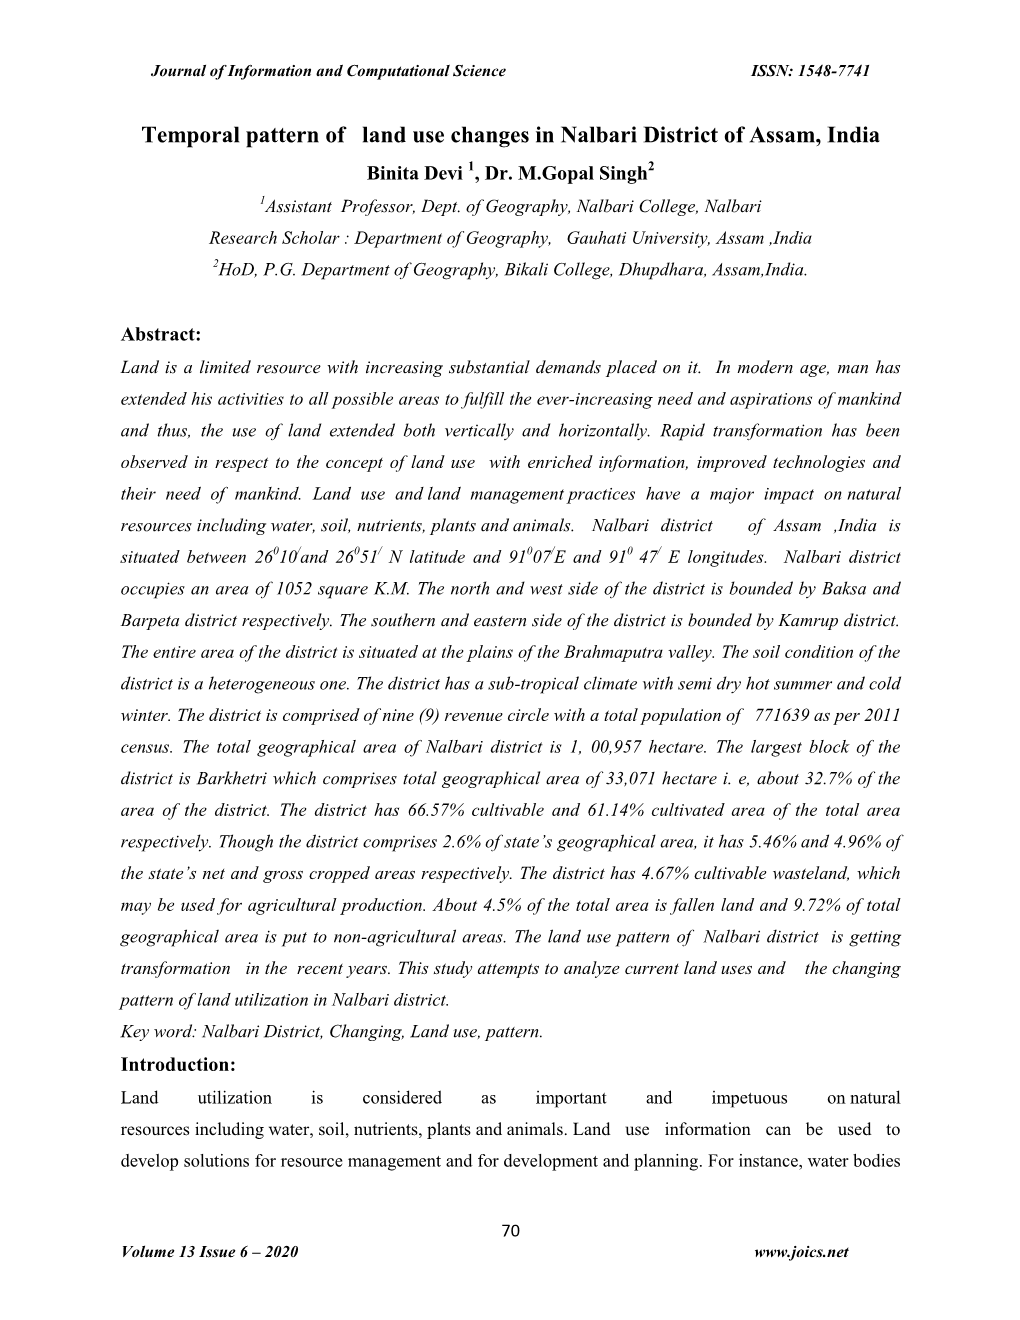 Temporal Pattern of Land Use Changes in Nalbari District of Assam, India Binita Devi 1, Dr